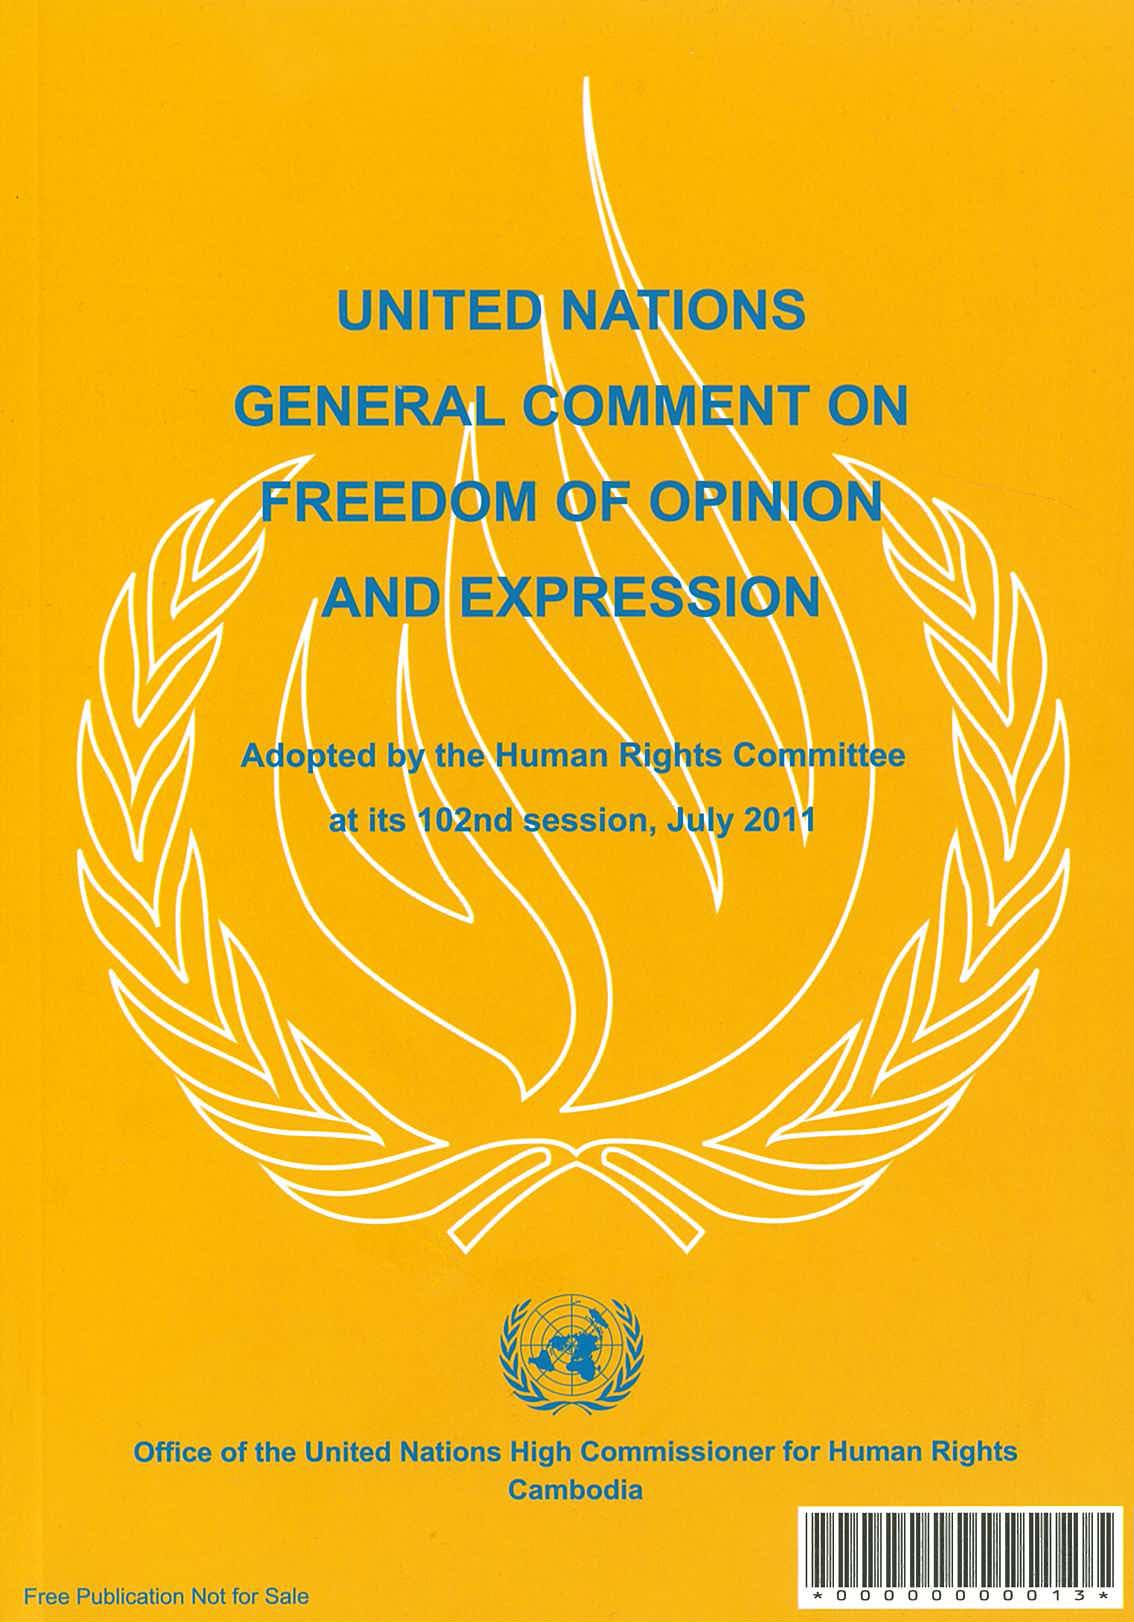 General Comment No 34 of the Human Rights Committee, on Freedom of Opinion and Expression